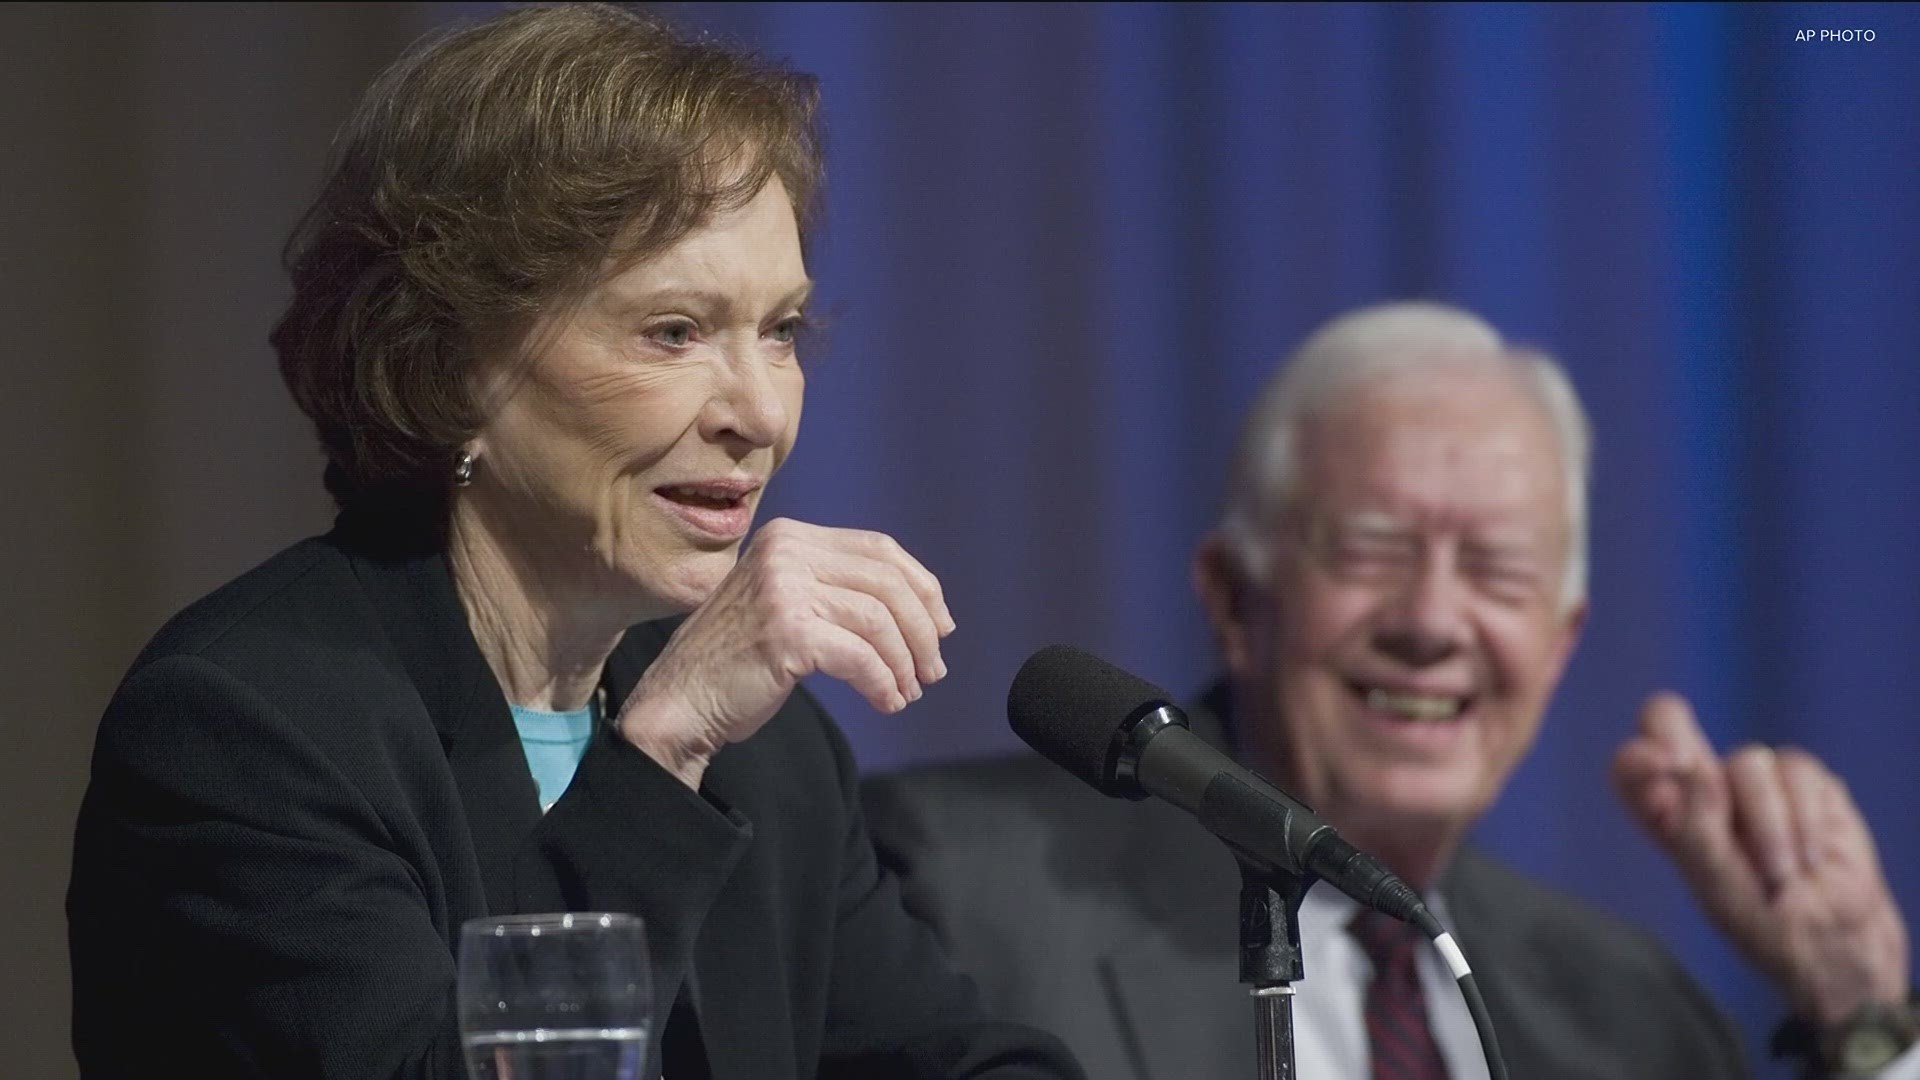 11Alive talked with the CEO of the Rosalynn Carter Institute for Caregivers about the the couple's decades of work on the issue.